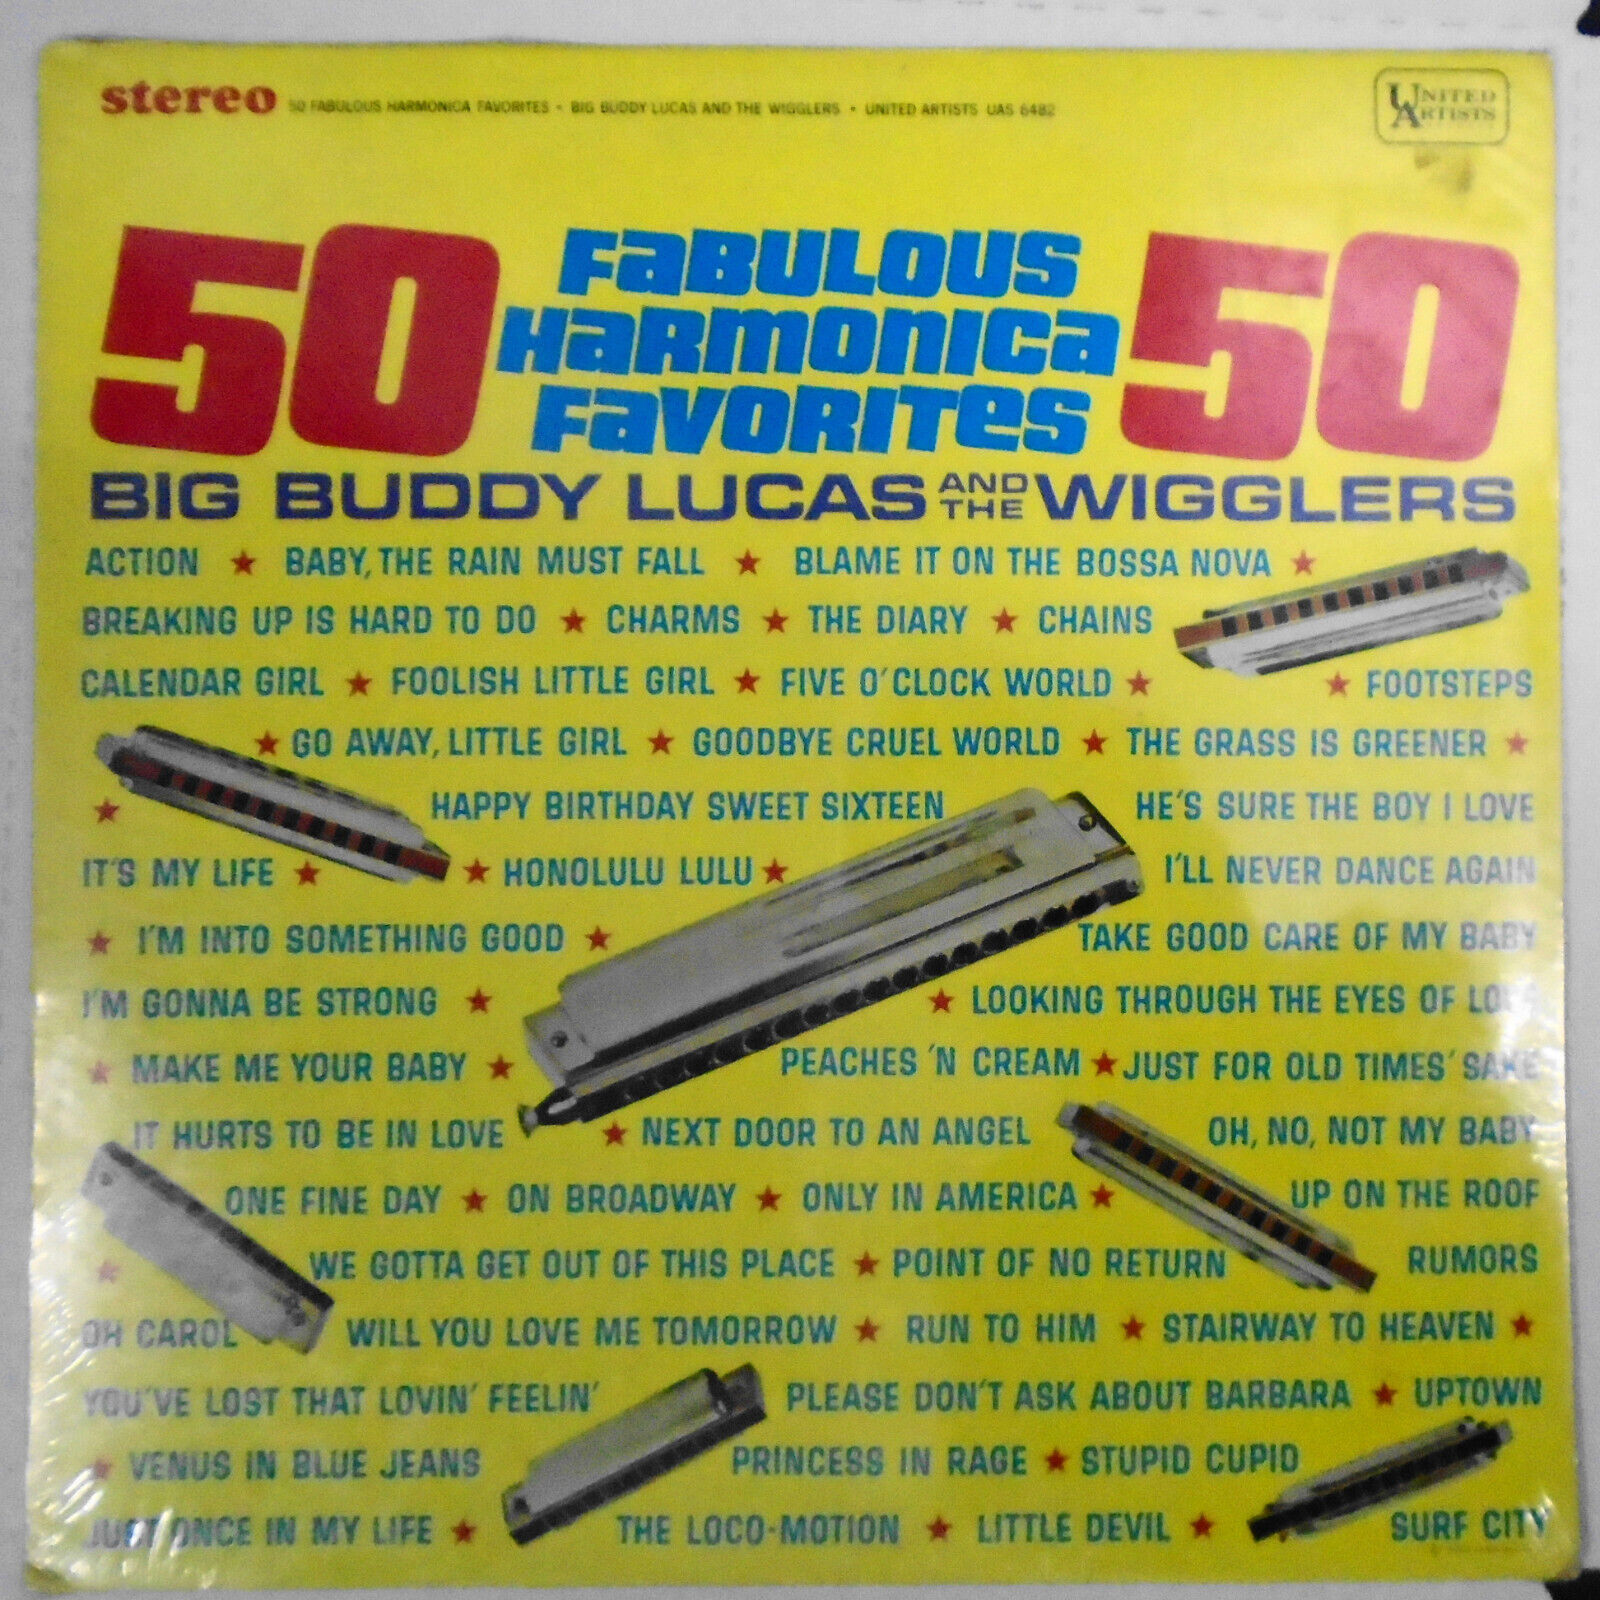 50 Fabulous Harmonica Favorites, by Big Buddy Lucas & The Wigglers  SEALED LP 